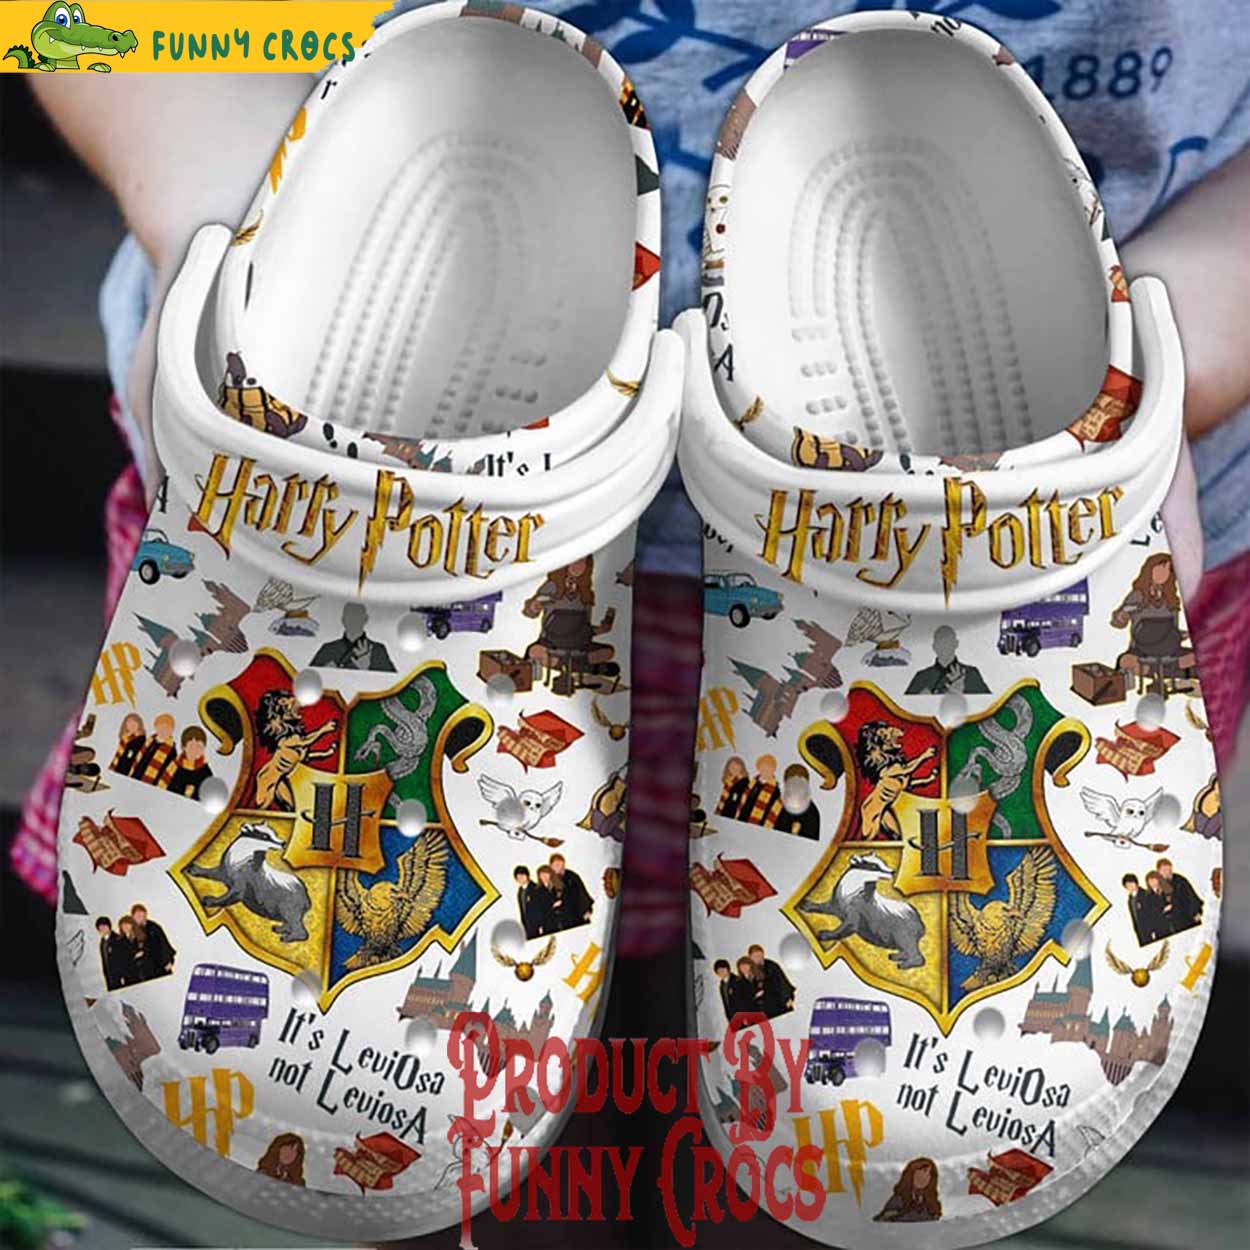 4 Houses Of Hogwarts From Harry Potter Crocs Shoes